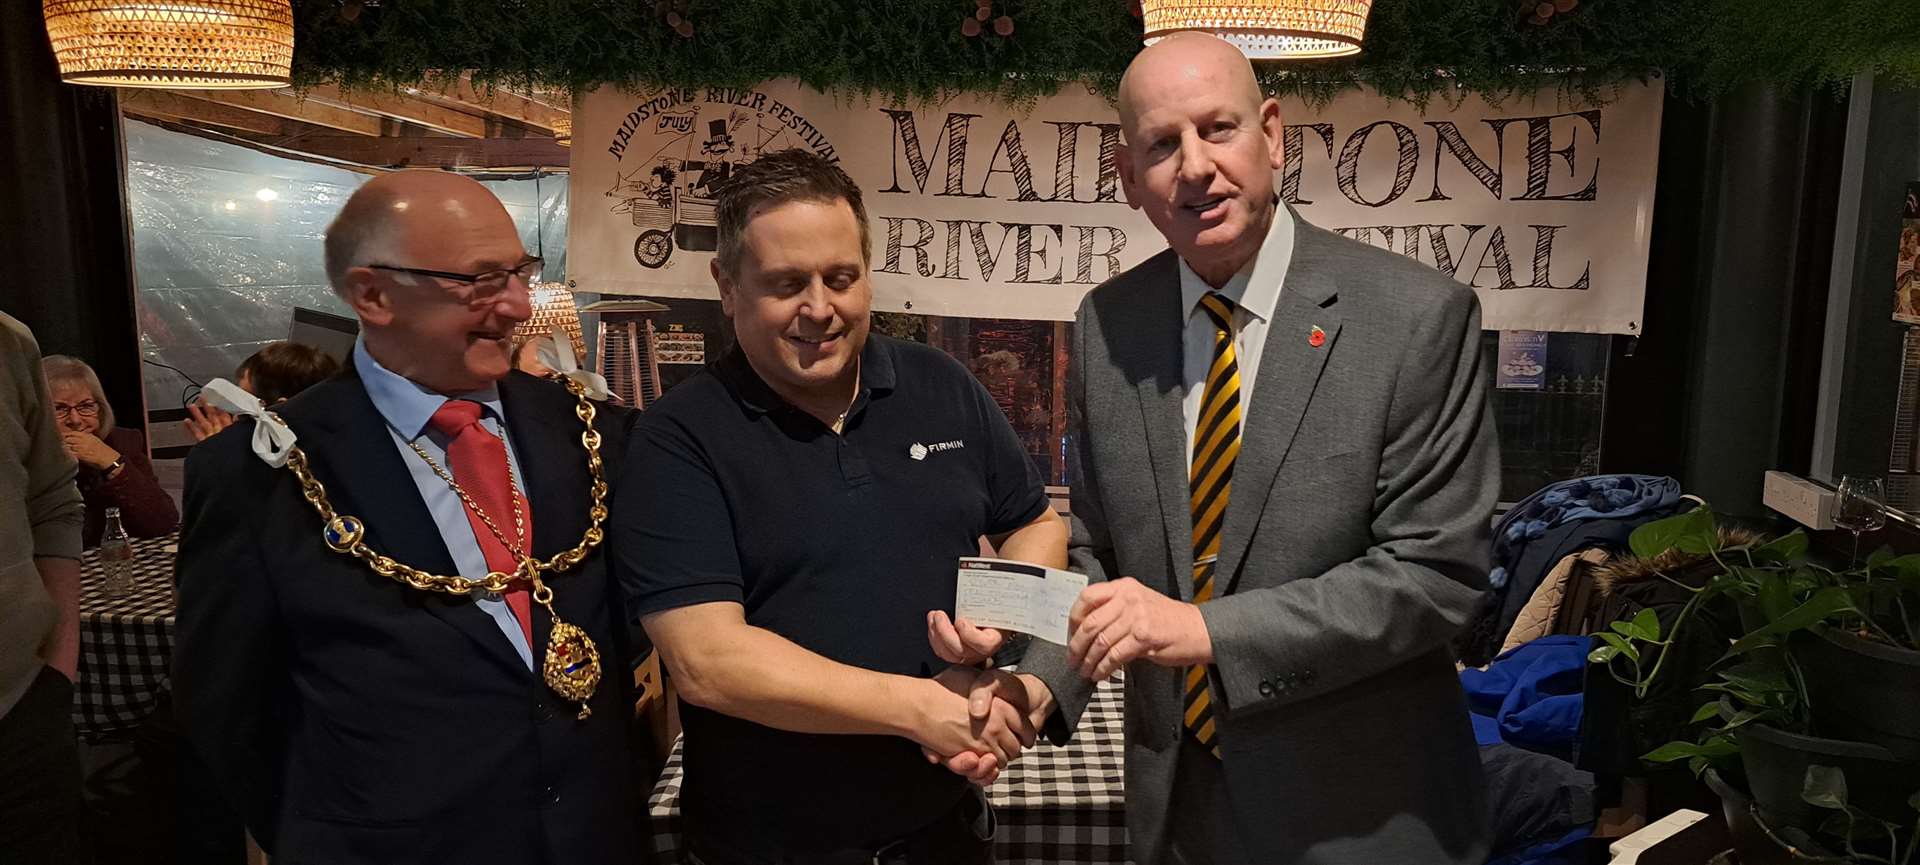 Paul Denyer from Alan Firmin Ltd presents a cheque for £10,000 sponsorship to Dave Naghi, the River Festival chairman, with the mayor Cllr Gordon Newton